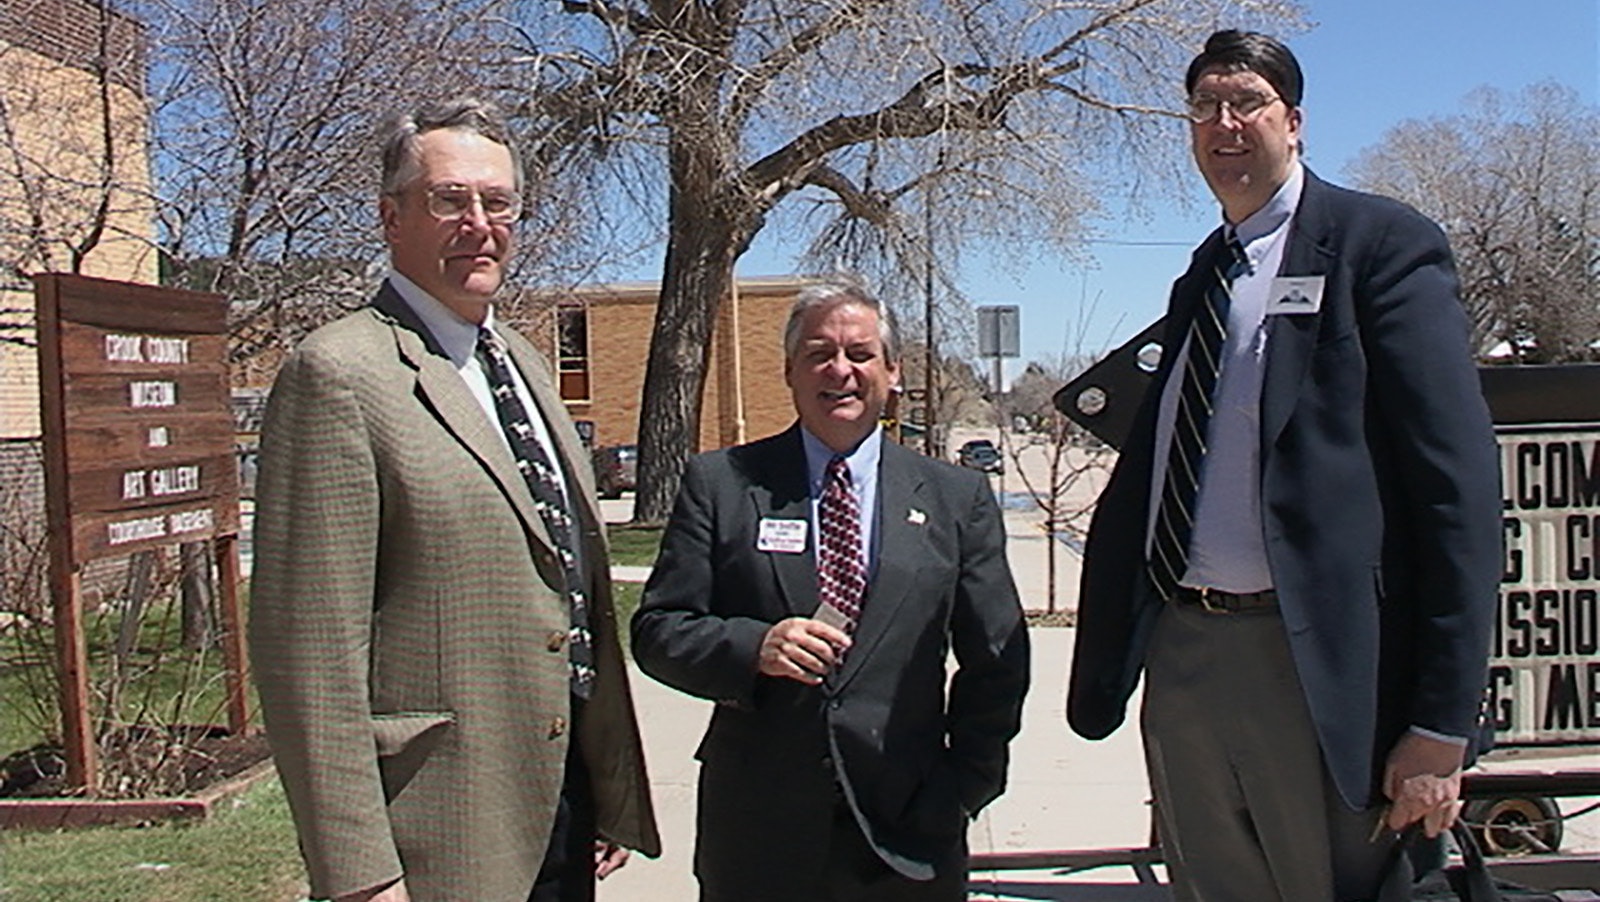 Bill Sniffin, center, with 7-foot-3 Paul Krause, right, and Nels Smith Jr., who stood 6-foot-7, in a 2002 photo.